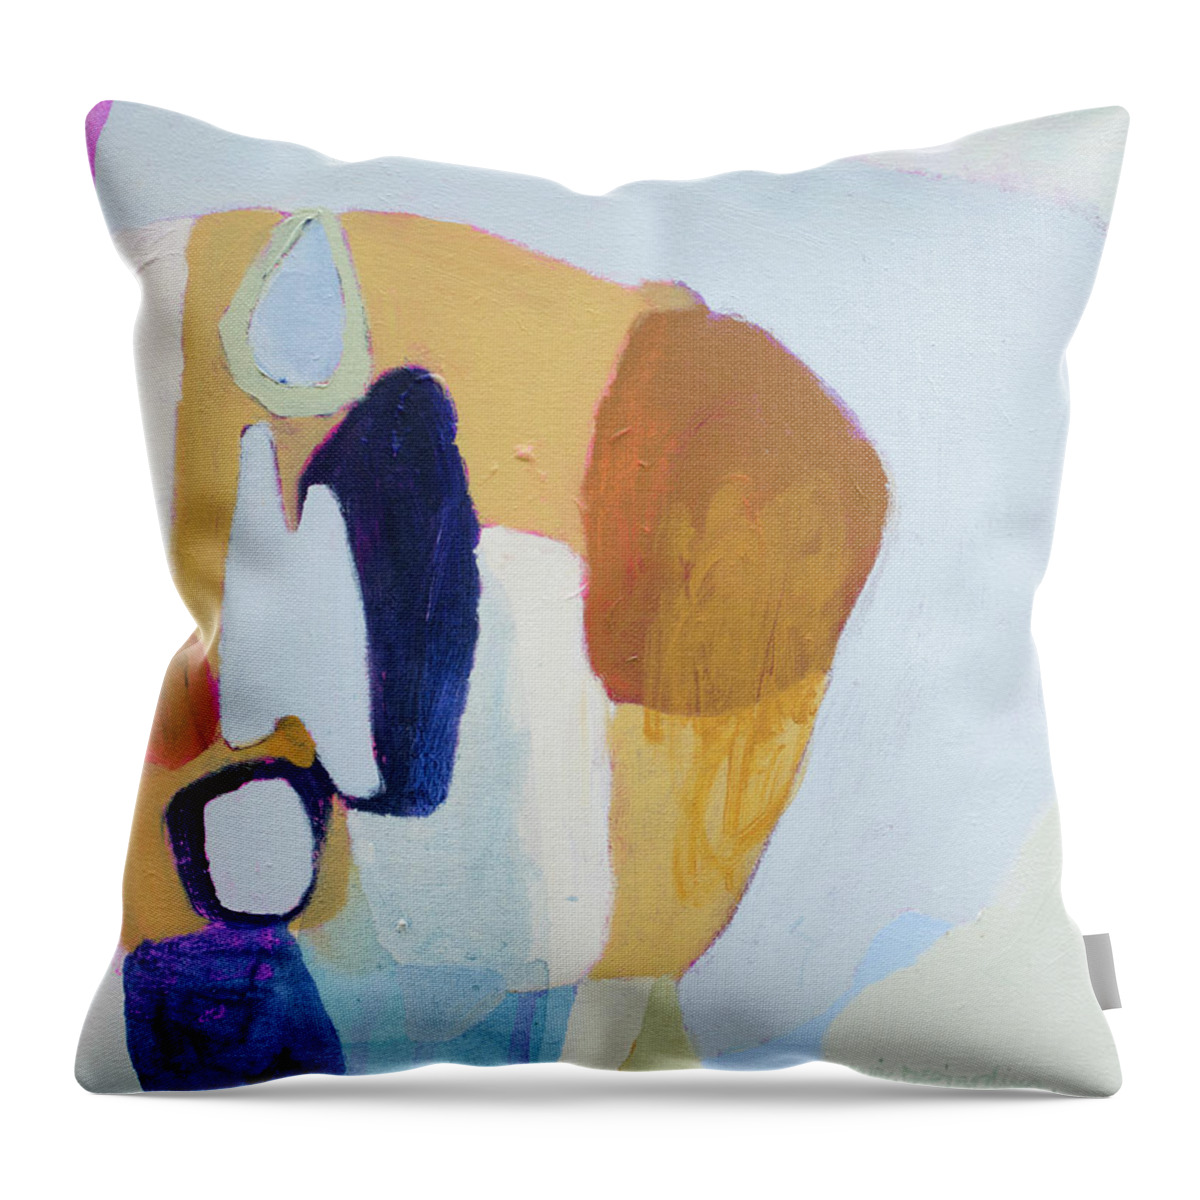 Abstract Throw Pillow featuring the painting Does This Make Me Look Fat? by Claire Desjardins